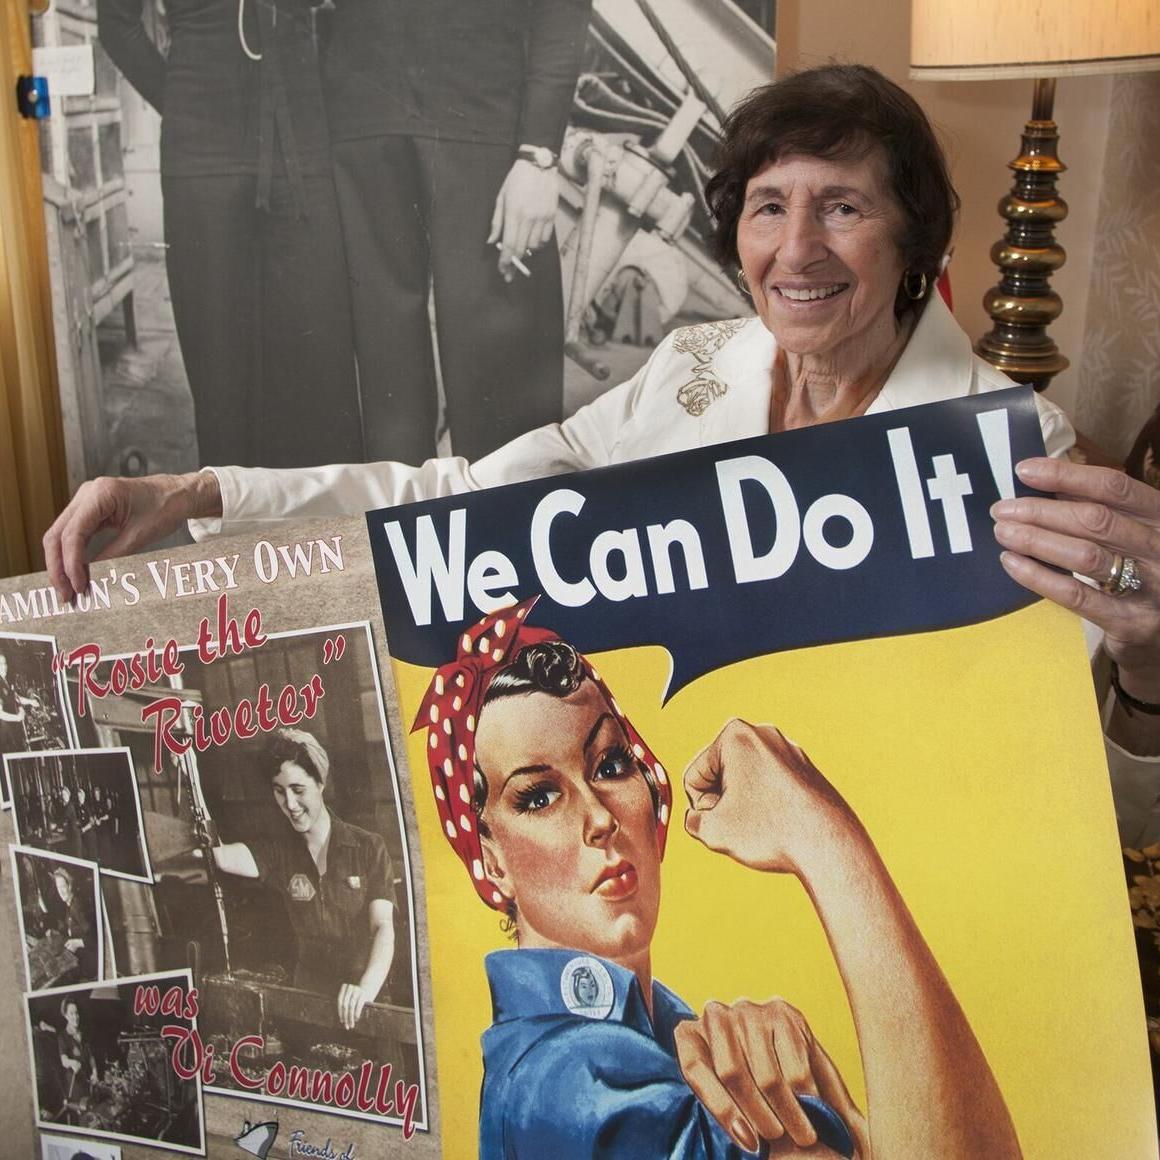 Obituary: Hamilton's 'Rosie the Riveter' was 'an inspiring and